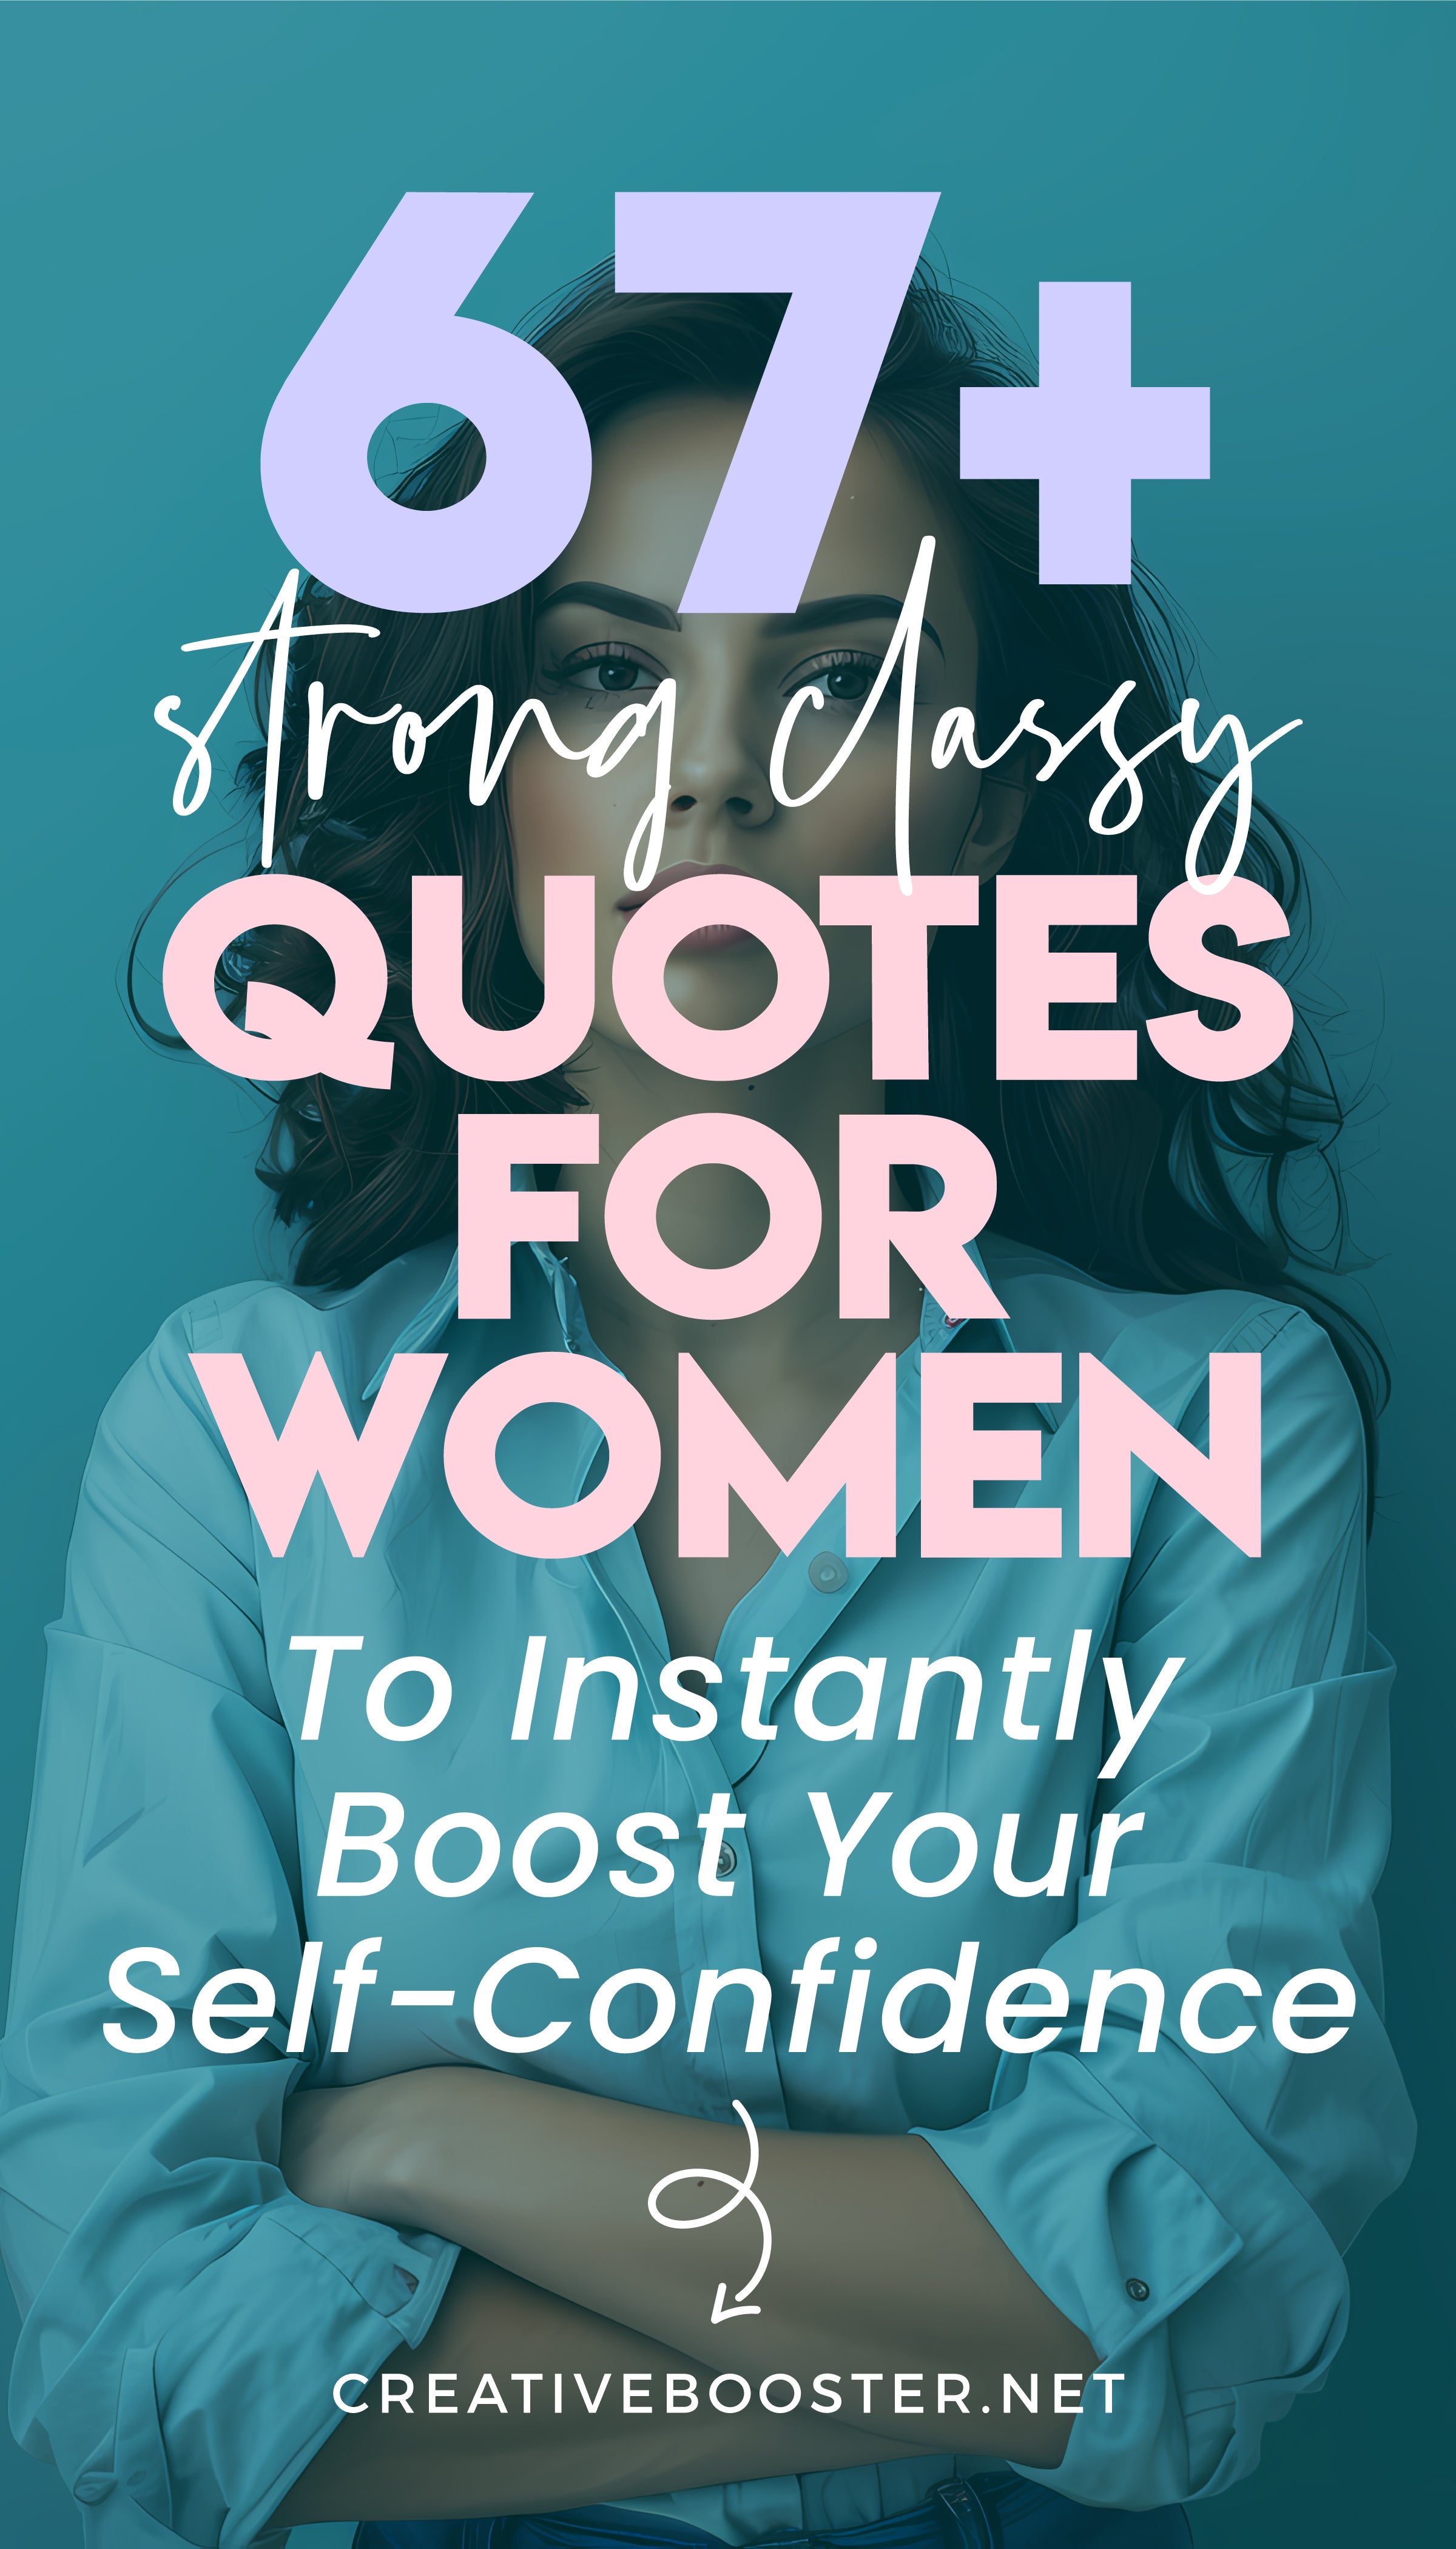 Classy-Strong-Confident-Woman-Quotes---67+-Classy-Quotes-to-Become-a-Strong-Confident-Woman-(Short,-Funny-&-More)-1